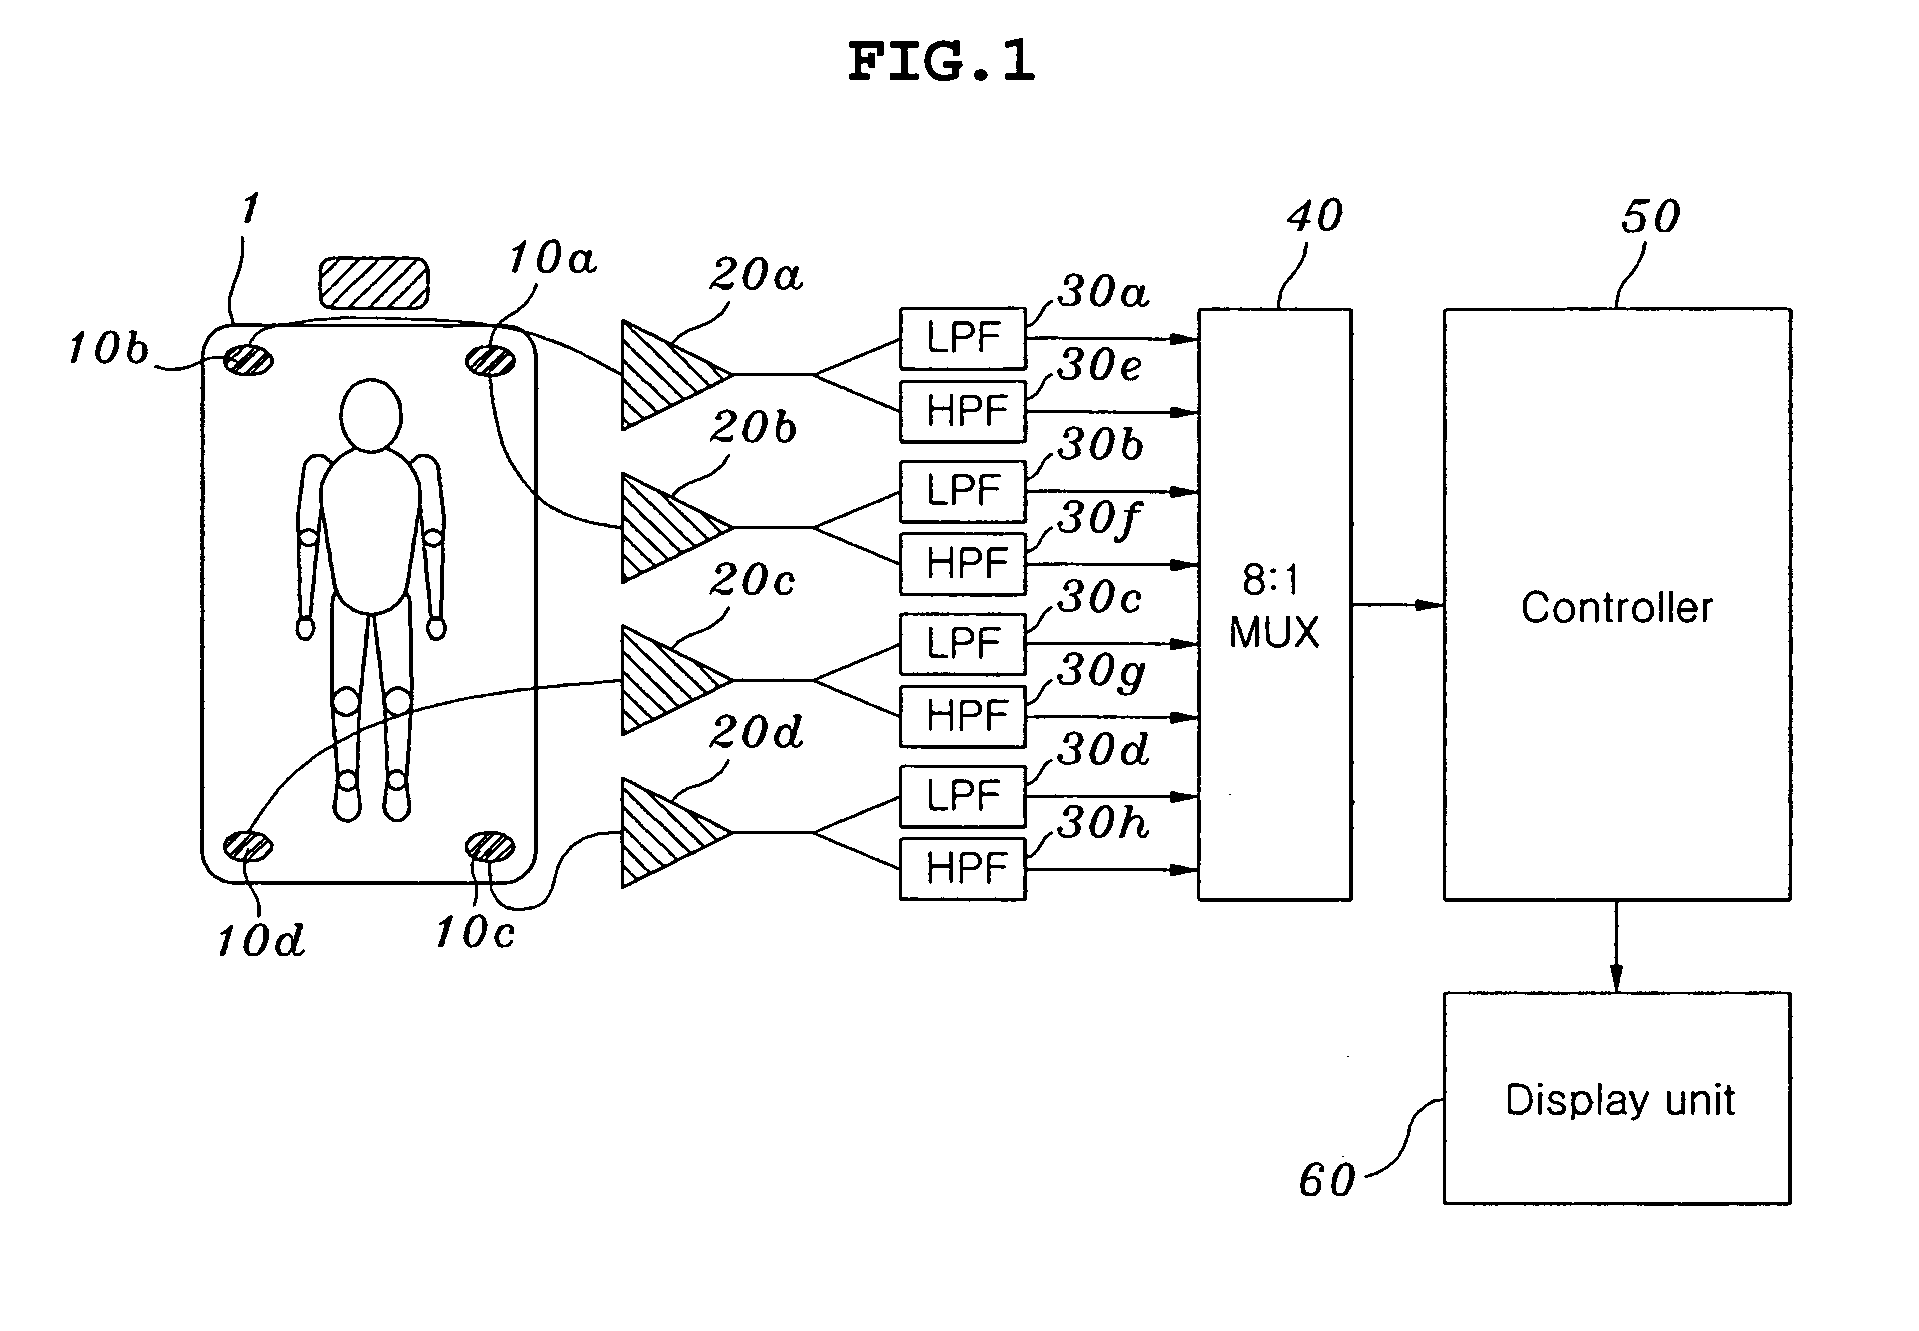 Apparatus for analyzing a sleep structure according to non-constrained weight detection